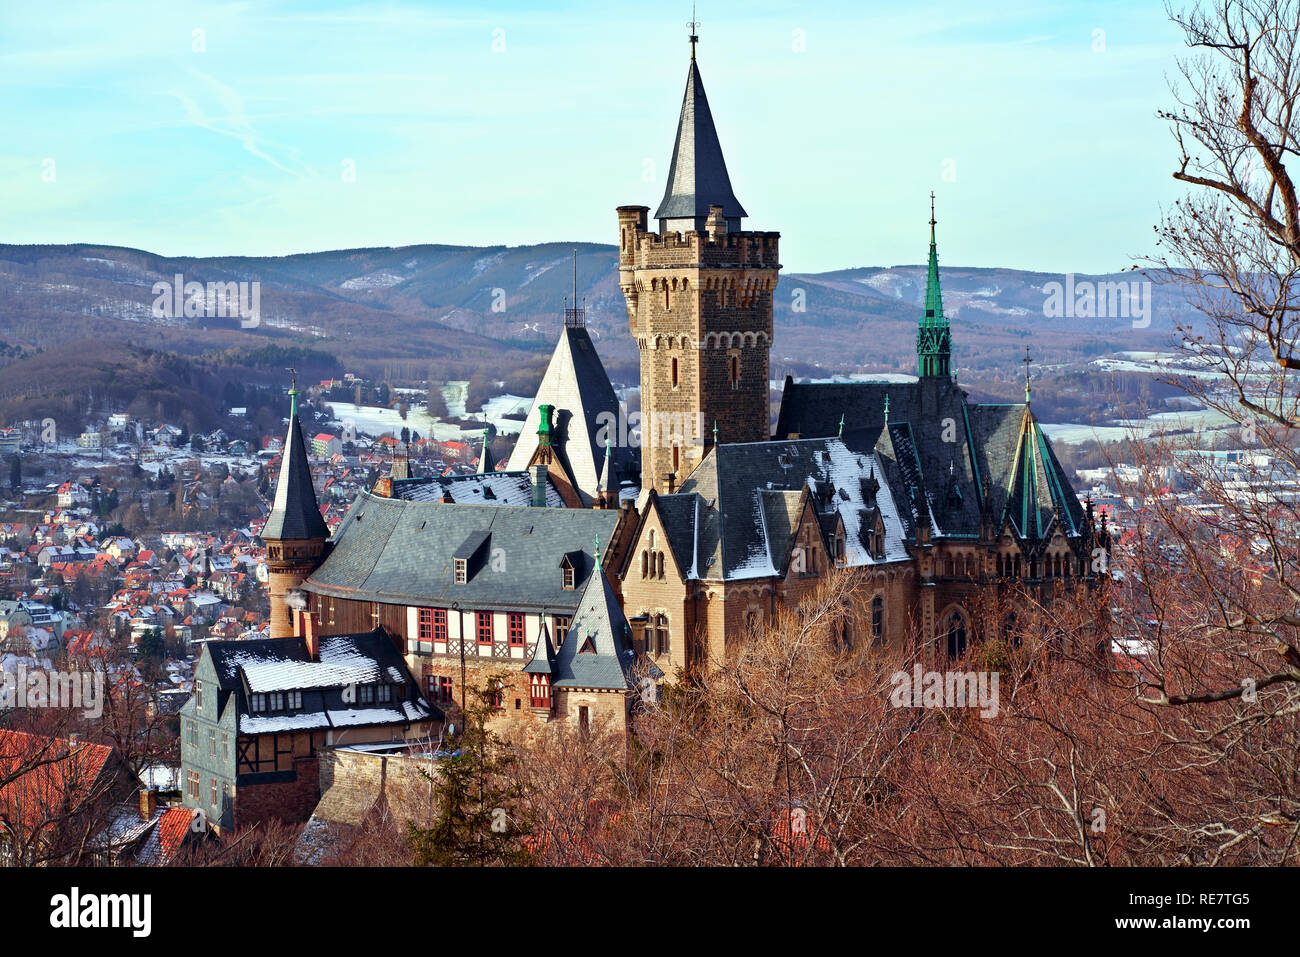 The picturesque castle of Wernigerode, high above town, in winter. Wernigerode in the Harz mountains, Saxony-Anhalt, central Germany. Stock Photo